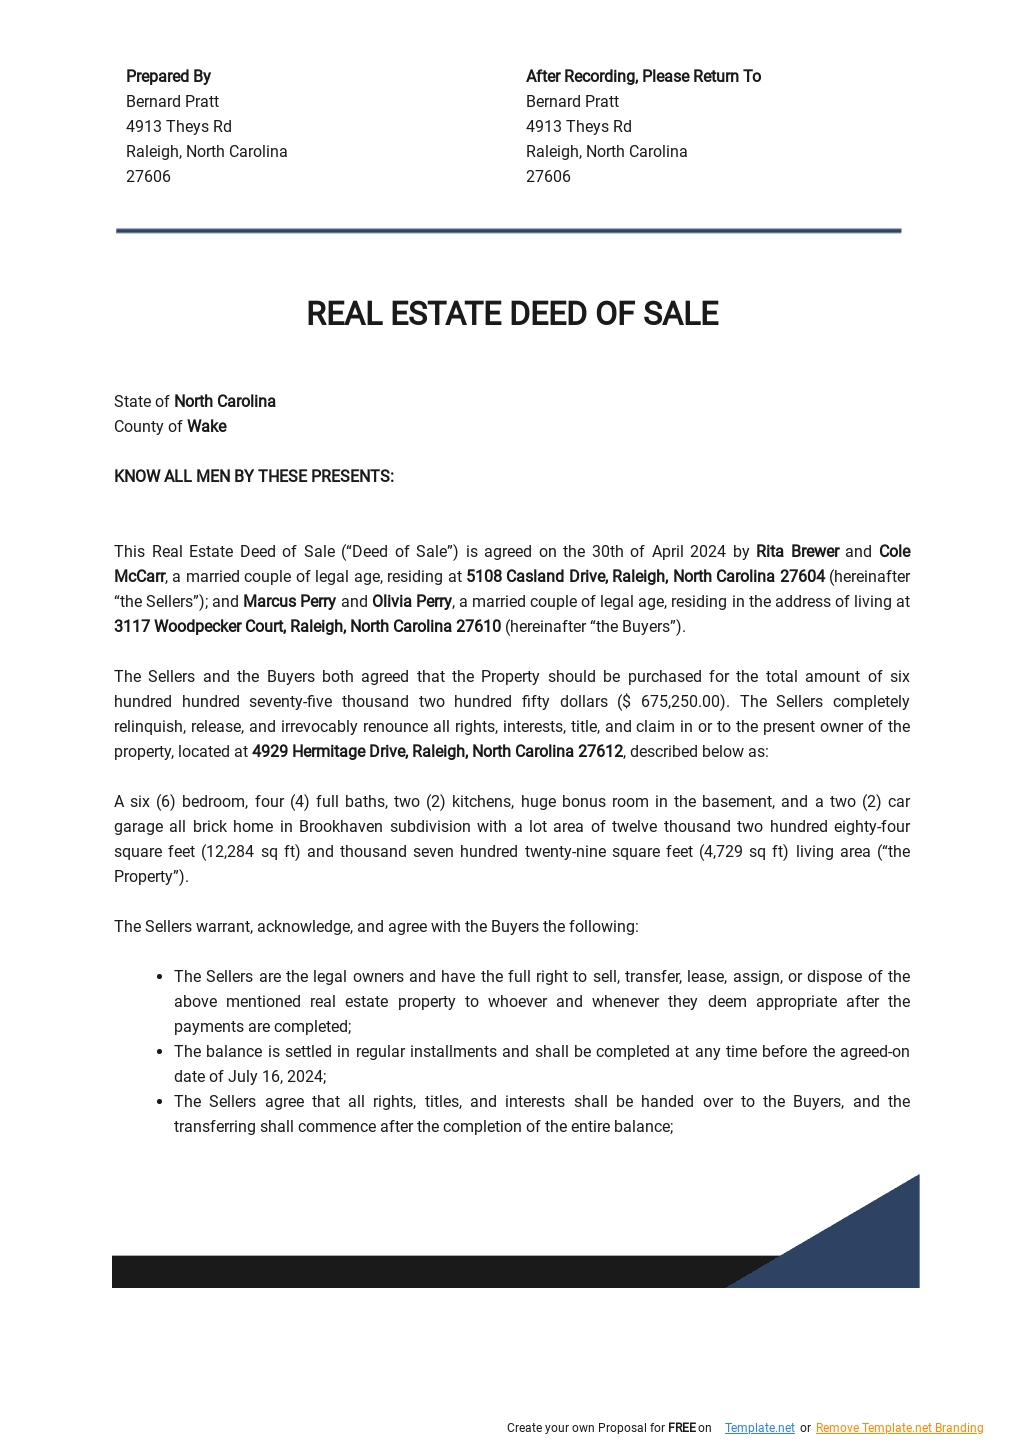 Real Estate Deed of Sale Template